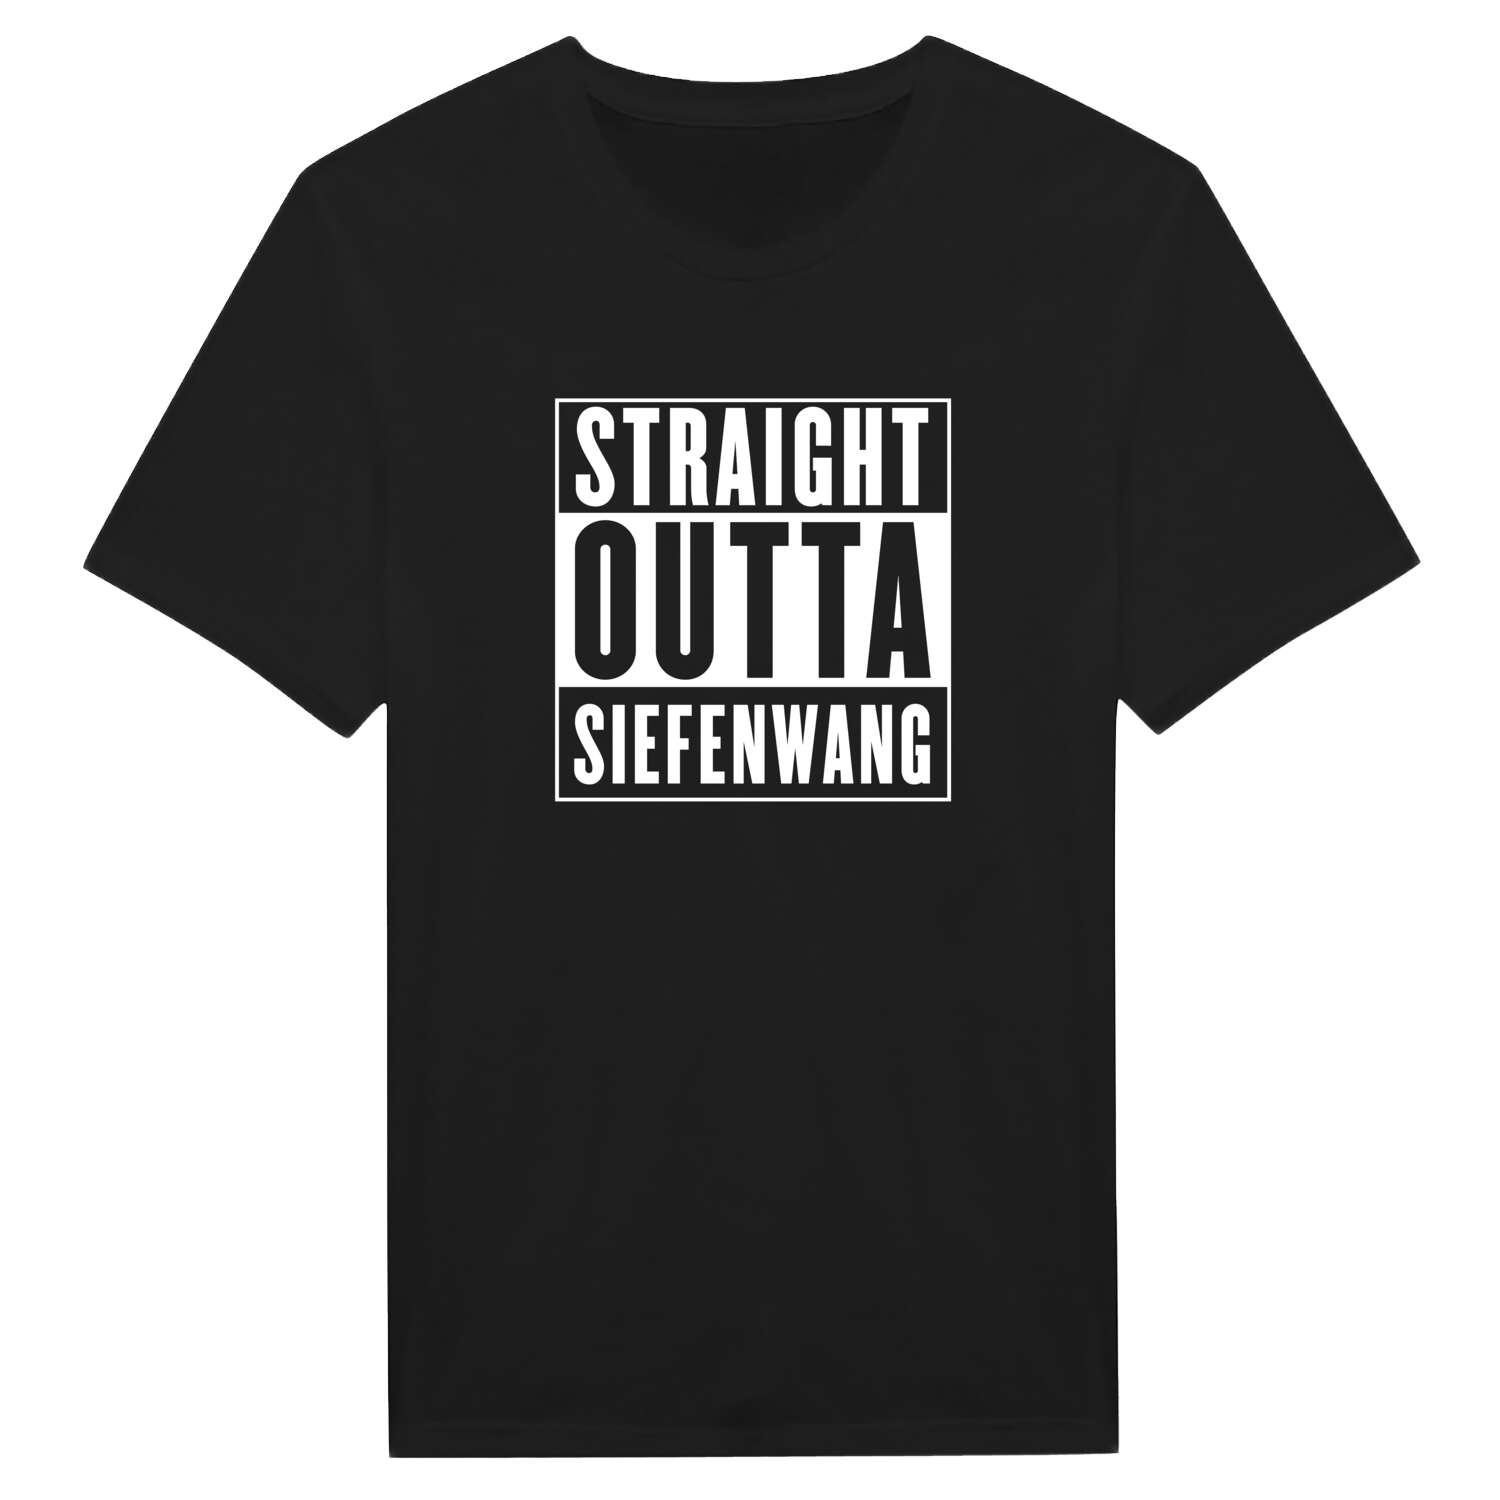 Siefenwang T-Shirt »Straight Outta«